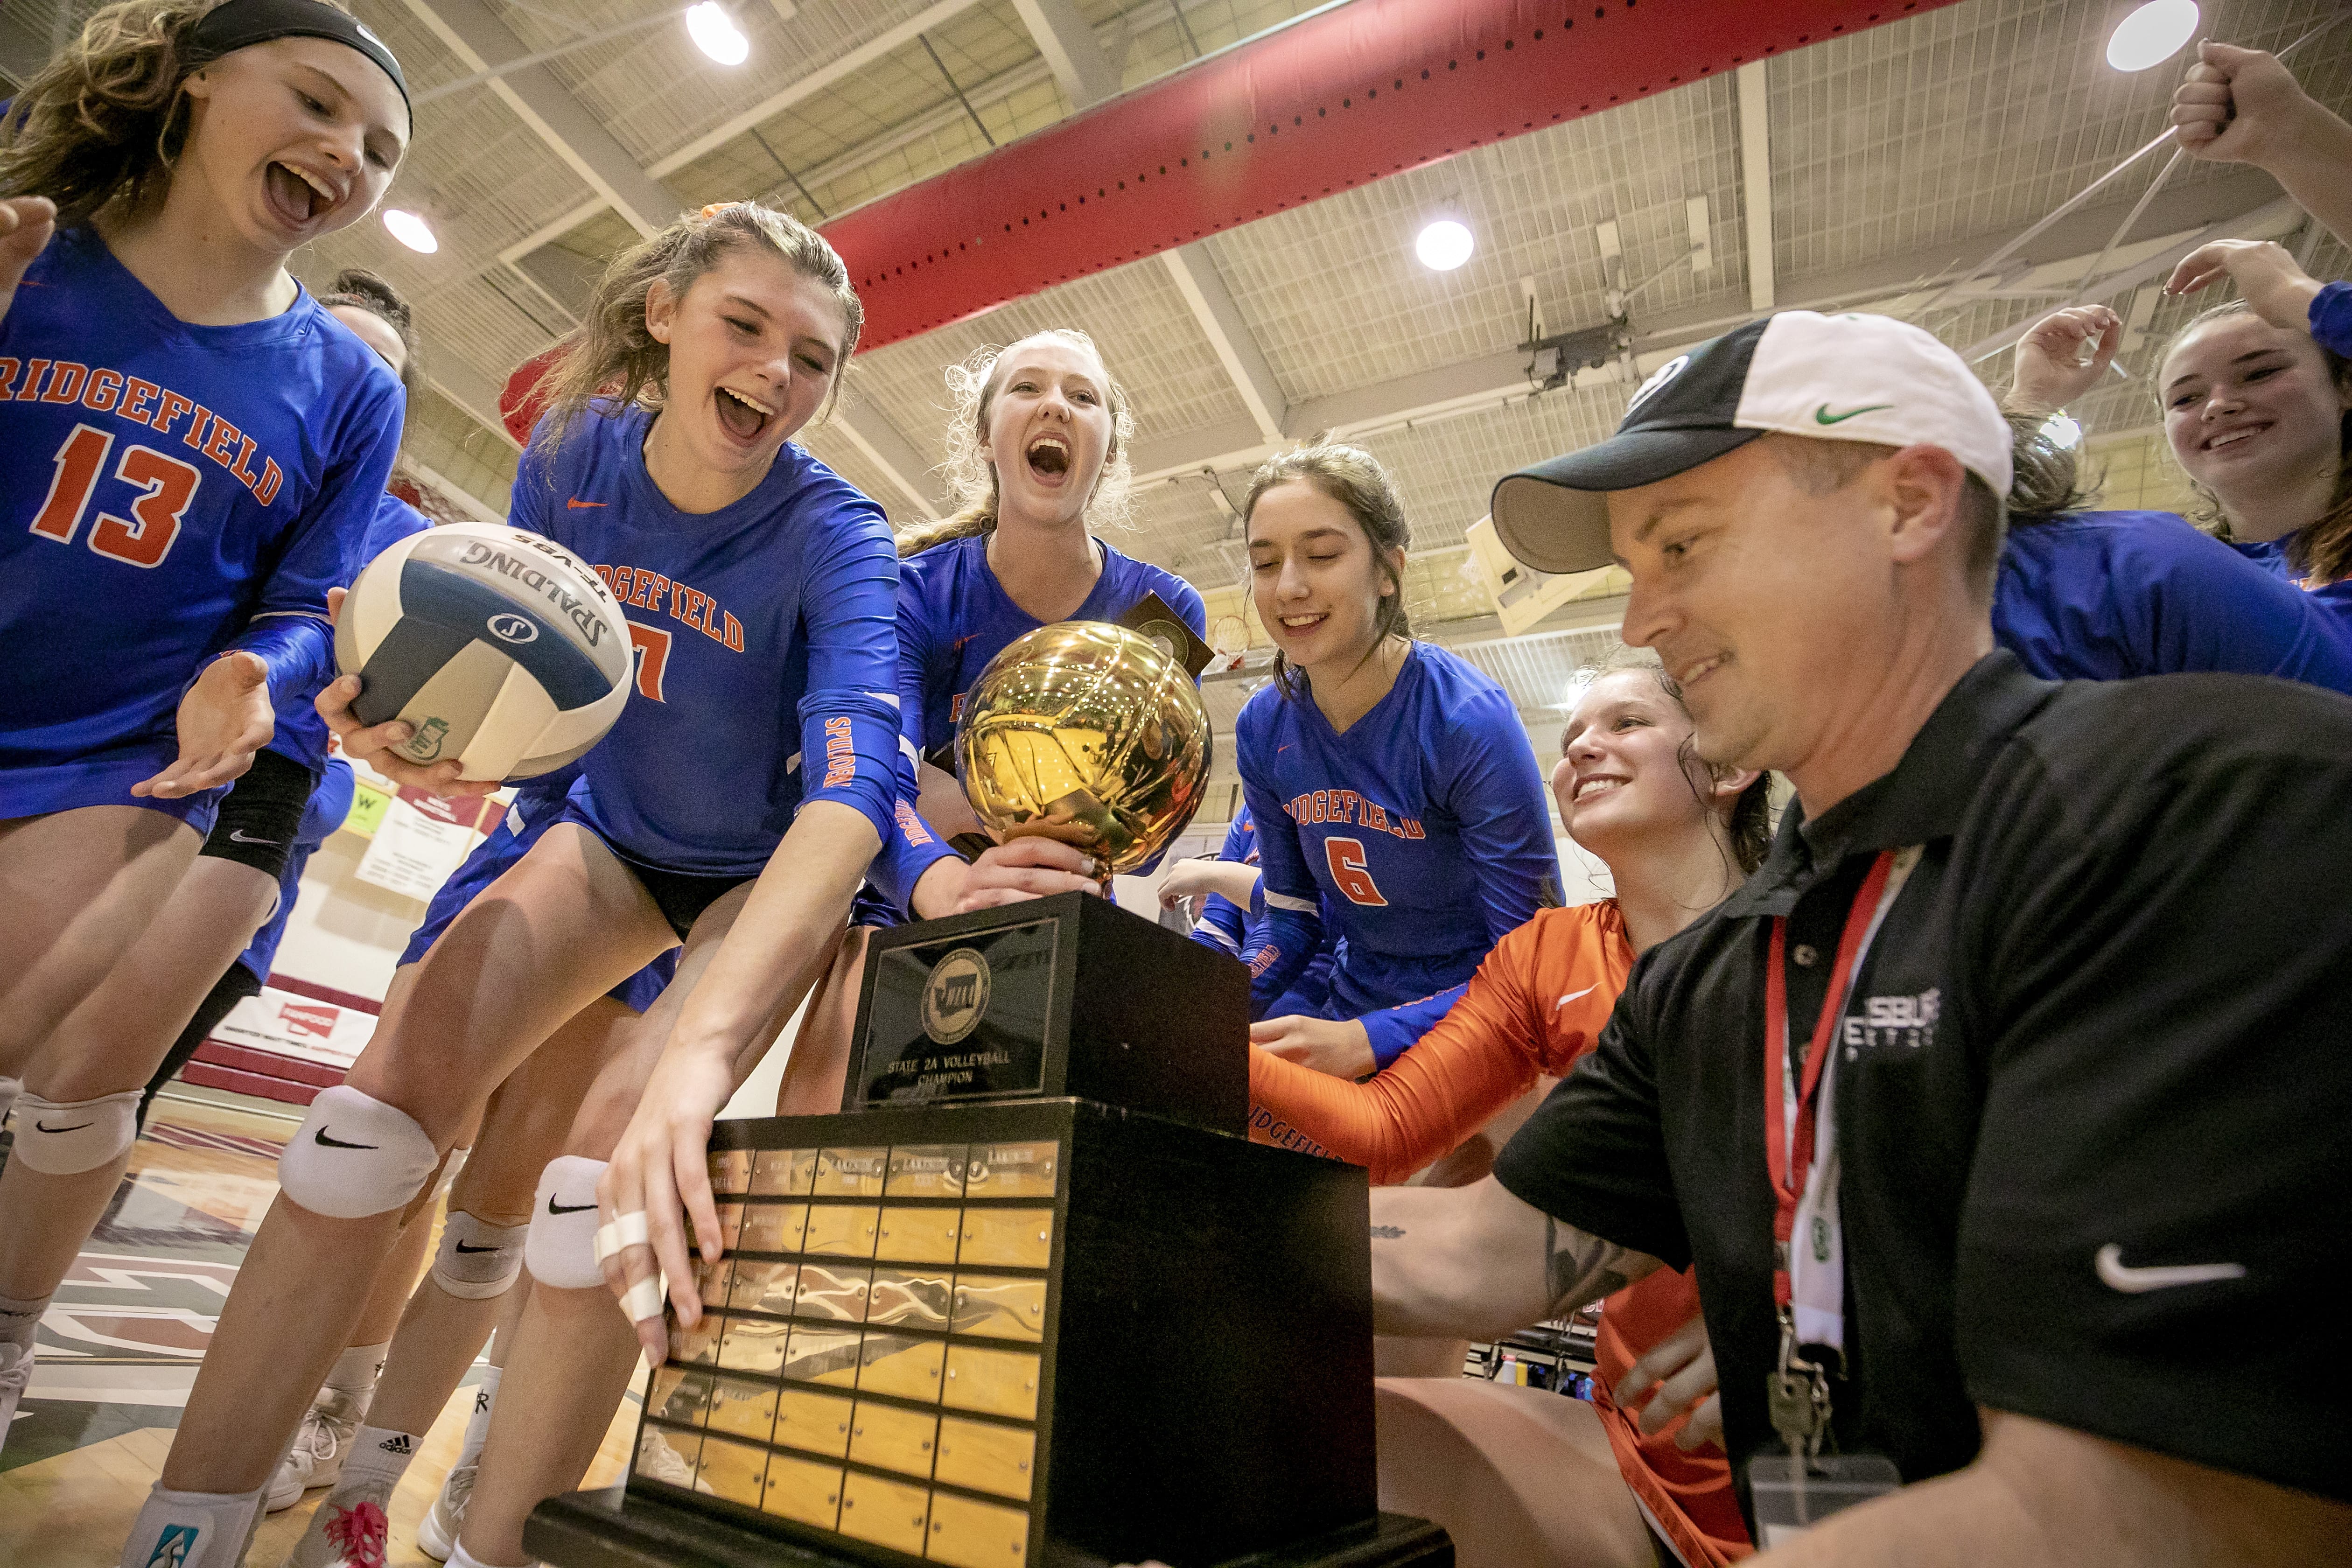 The Ridgefield High School volleyball team celebrates as Neil Musser, right, presents the WIAA 2A girls championship trophy after the Spudders defeats the Ellensburg Bulldogs 3-1 on Saturday, Nov. 16, 2019, at the Nicholson Pavilion in Ellensburg, Wash.